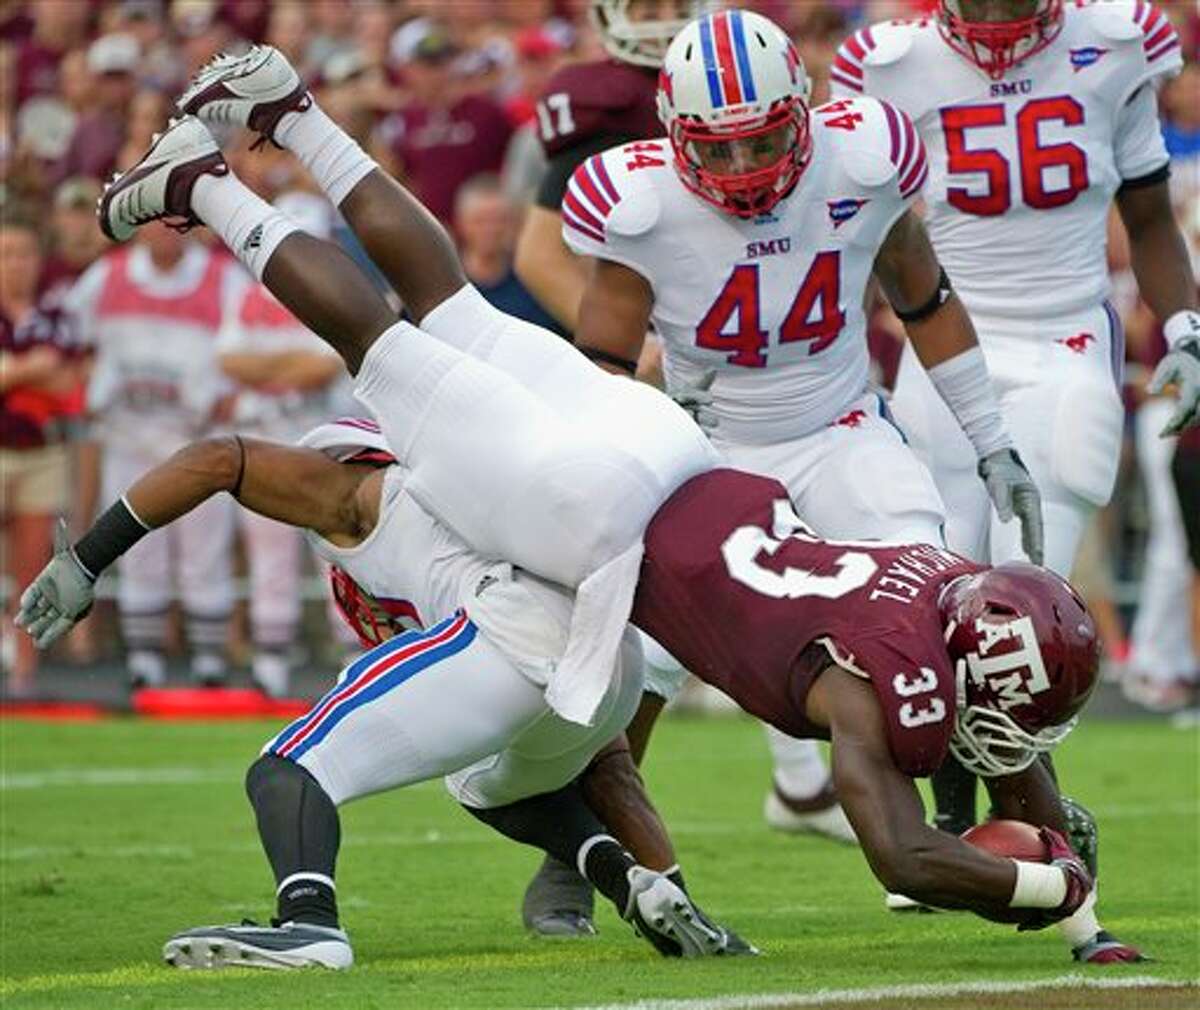 Texas A&M running back Christine Michael (33) dives over SMU's Ryan Smith, bottom, as Taylor Reed (44) helps during the first quarter of an NCAA college football game, Sunday, Sept. 4, 2011, in College Station, Texas. (AP Photo/Dave Einsel)